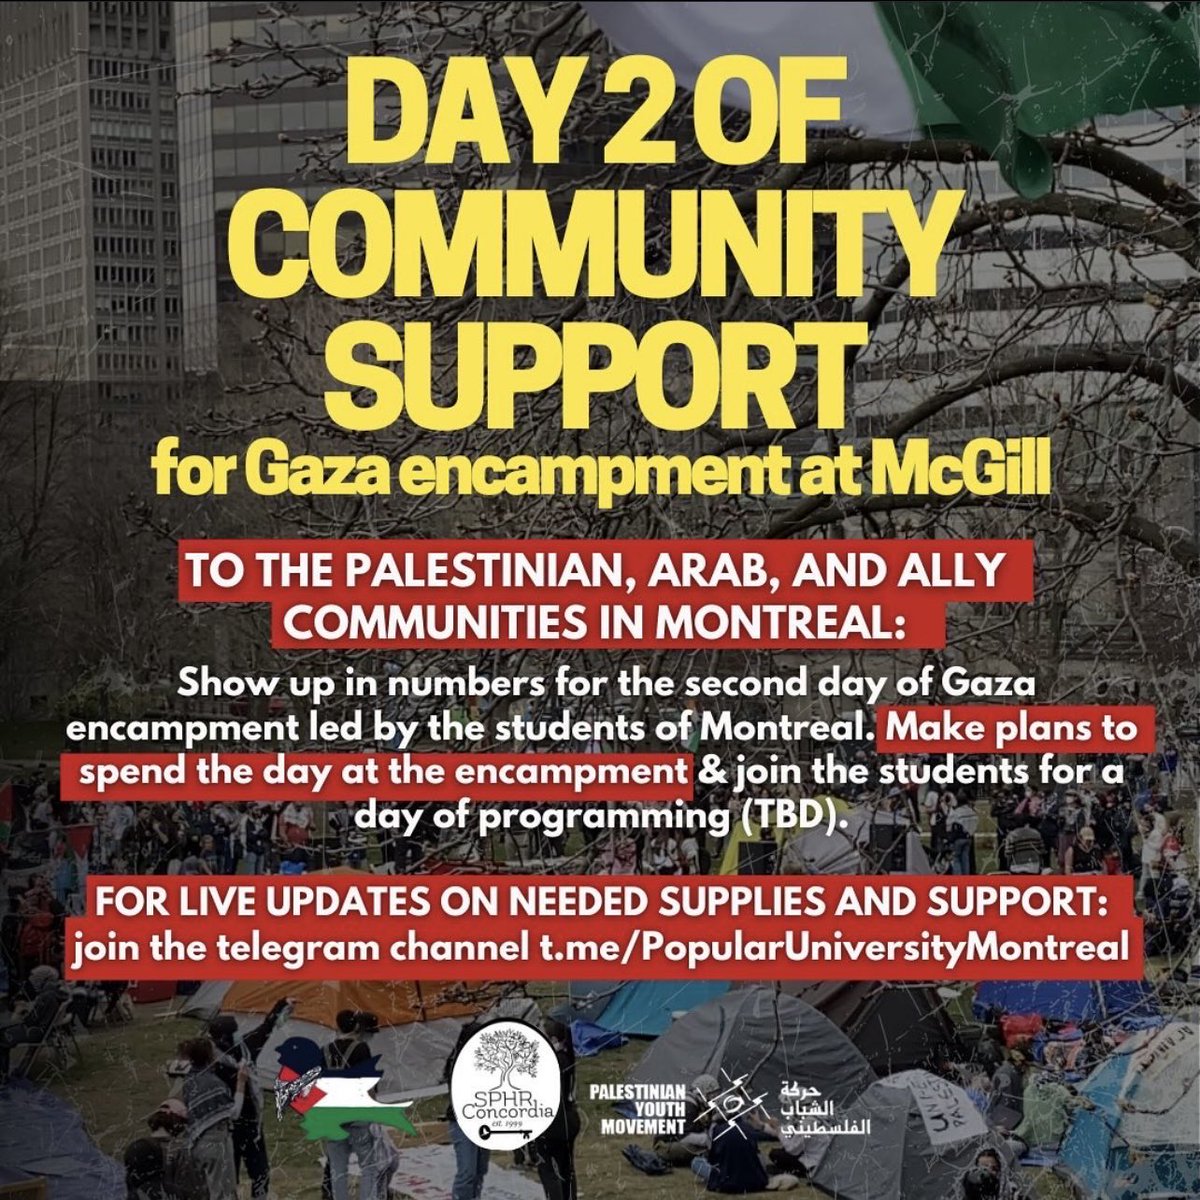 🚨DAY 2 OF COMMUNITY SUPPORT FOR THE POPULAR UNIVERSITY IN MONTREAL We call on the community to support the students by making plans to stay at the outskirts of the encampment all day. The student coalition will be publishing a programming of activities.